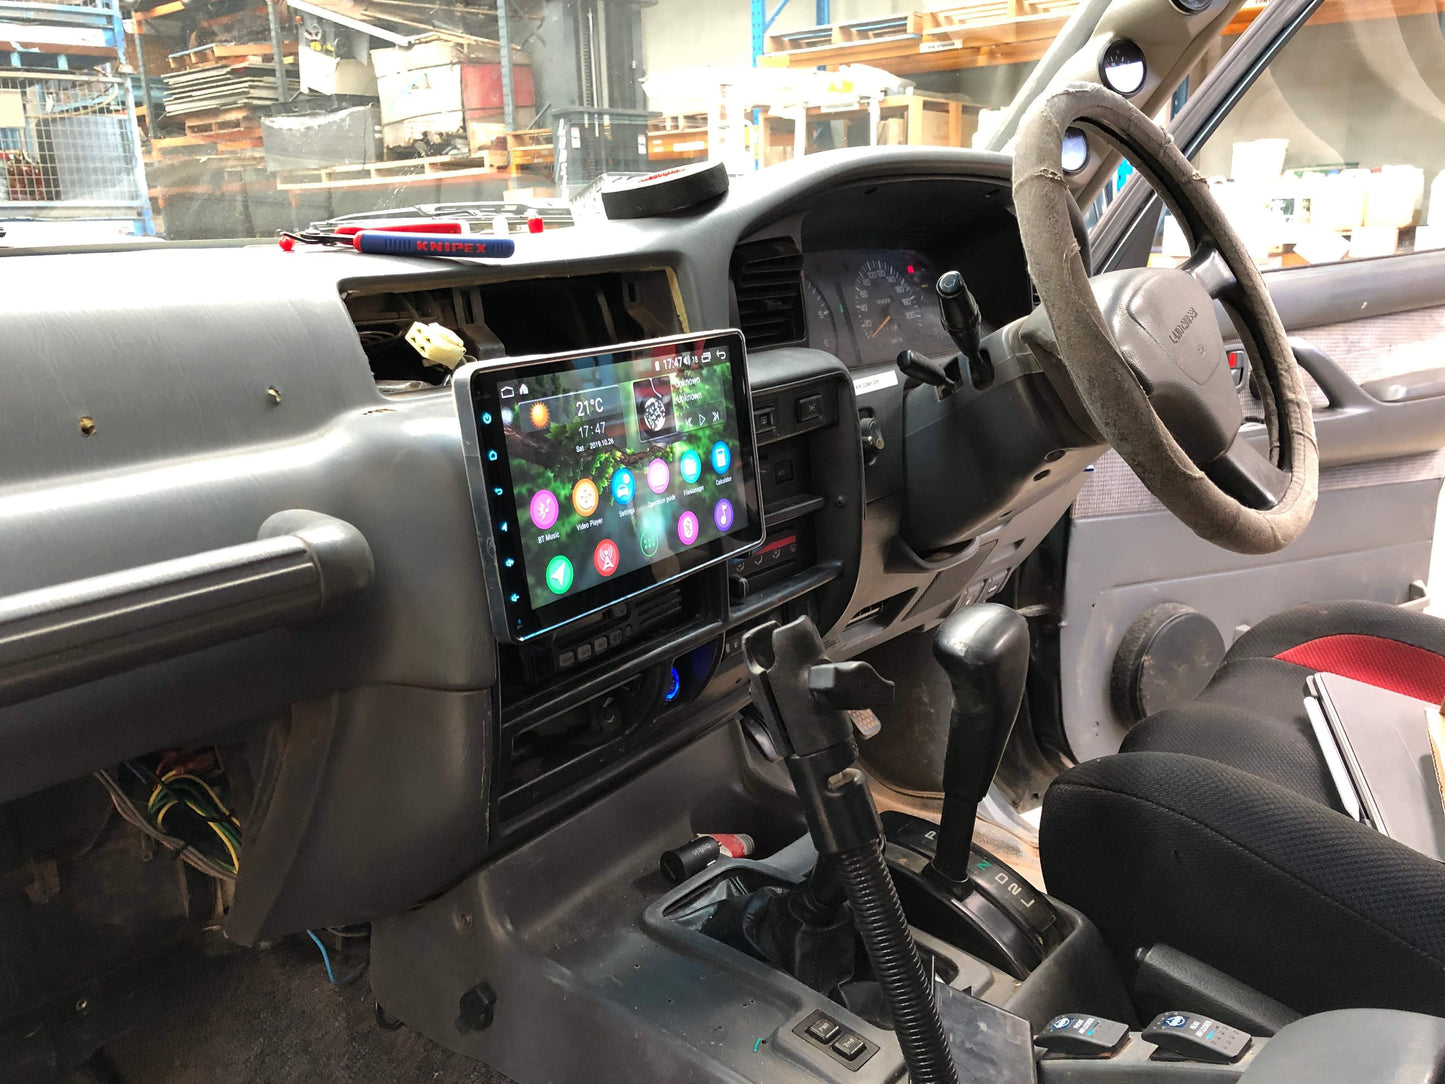 9 inch Android Head unit to suit Nissan D40 Navara